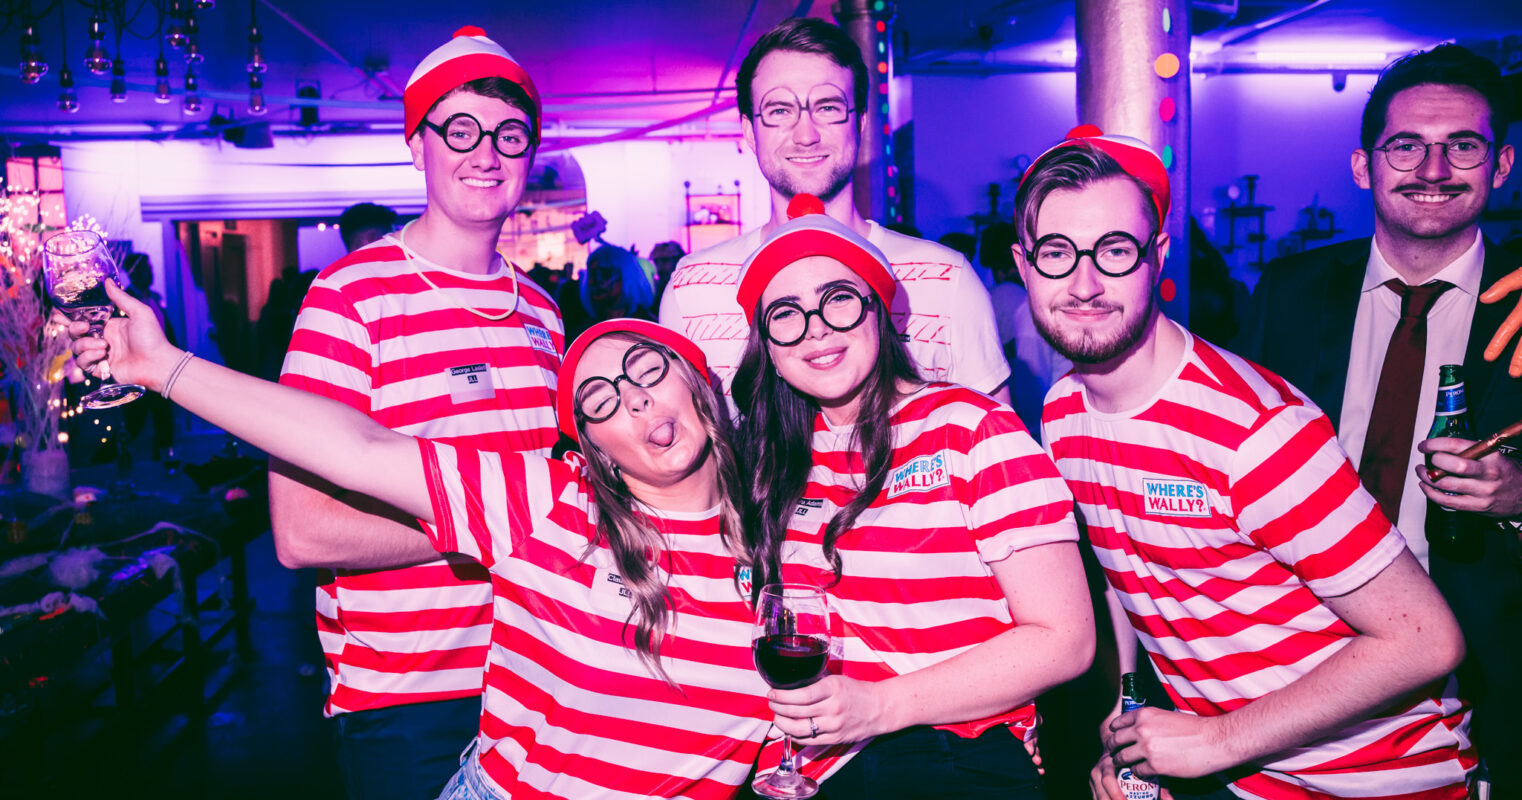 A group in striped shirts and hats playfully impersonates the character Wally from a popular search-and-find book series.